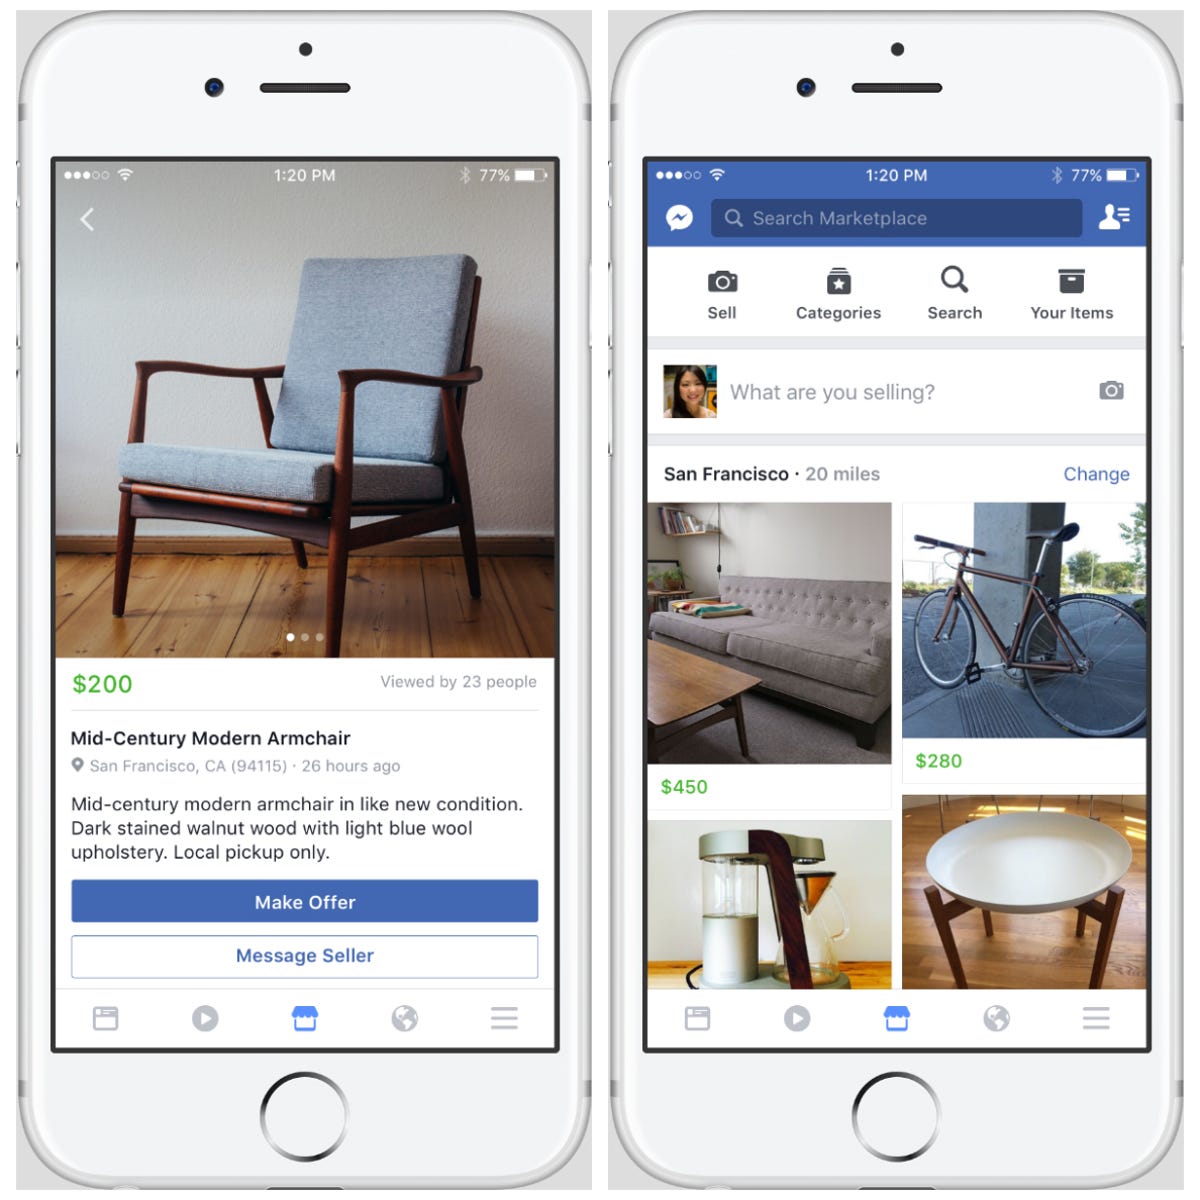 6 tips for avoiding scams on Facebook Marketplace - CNET